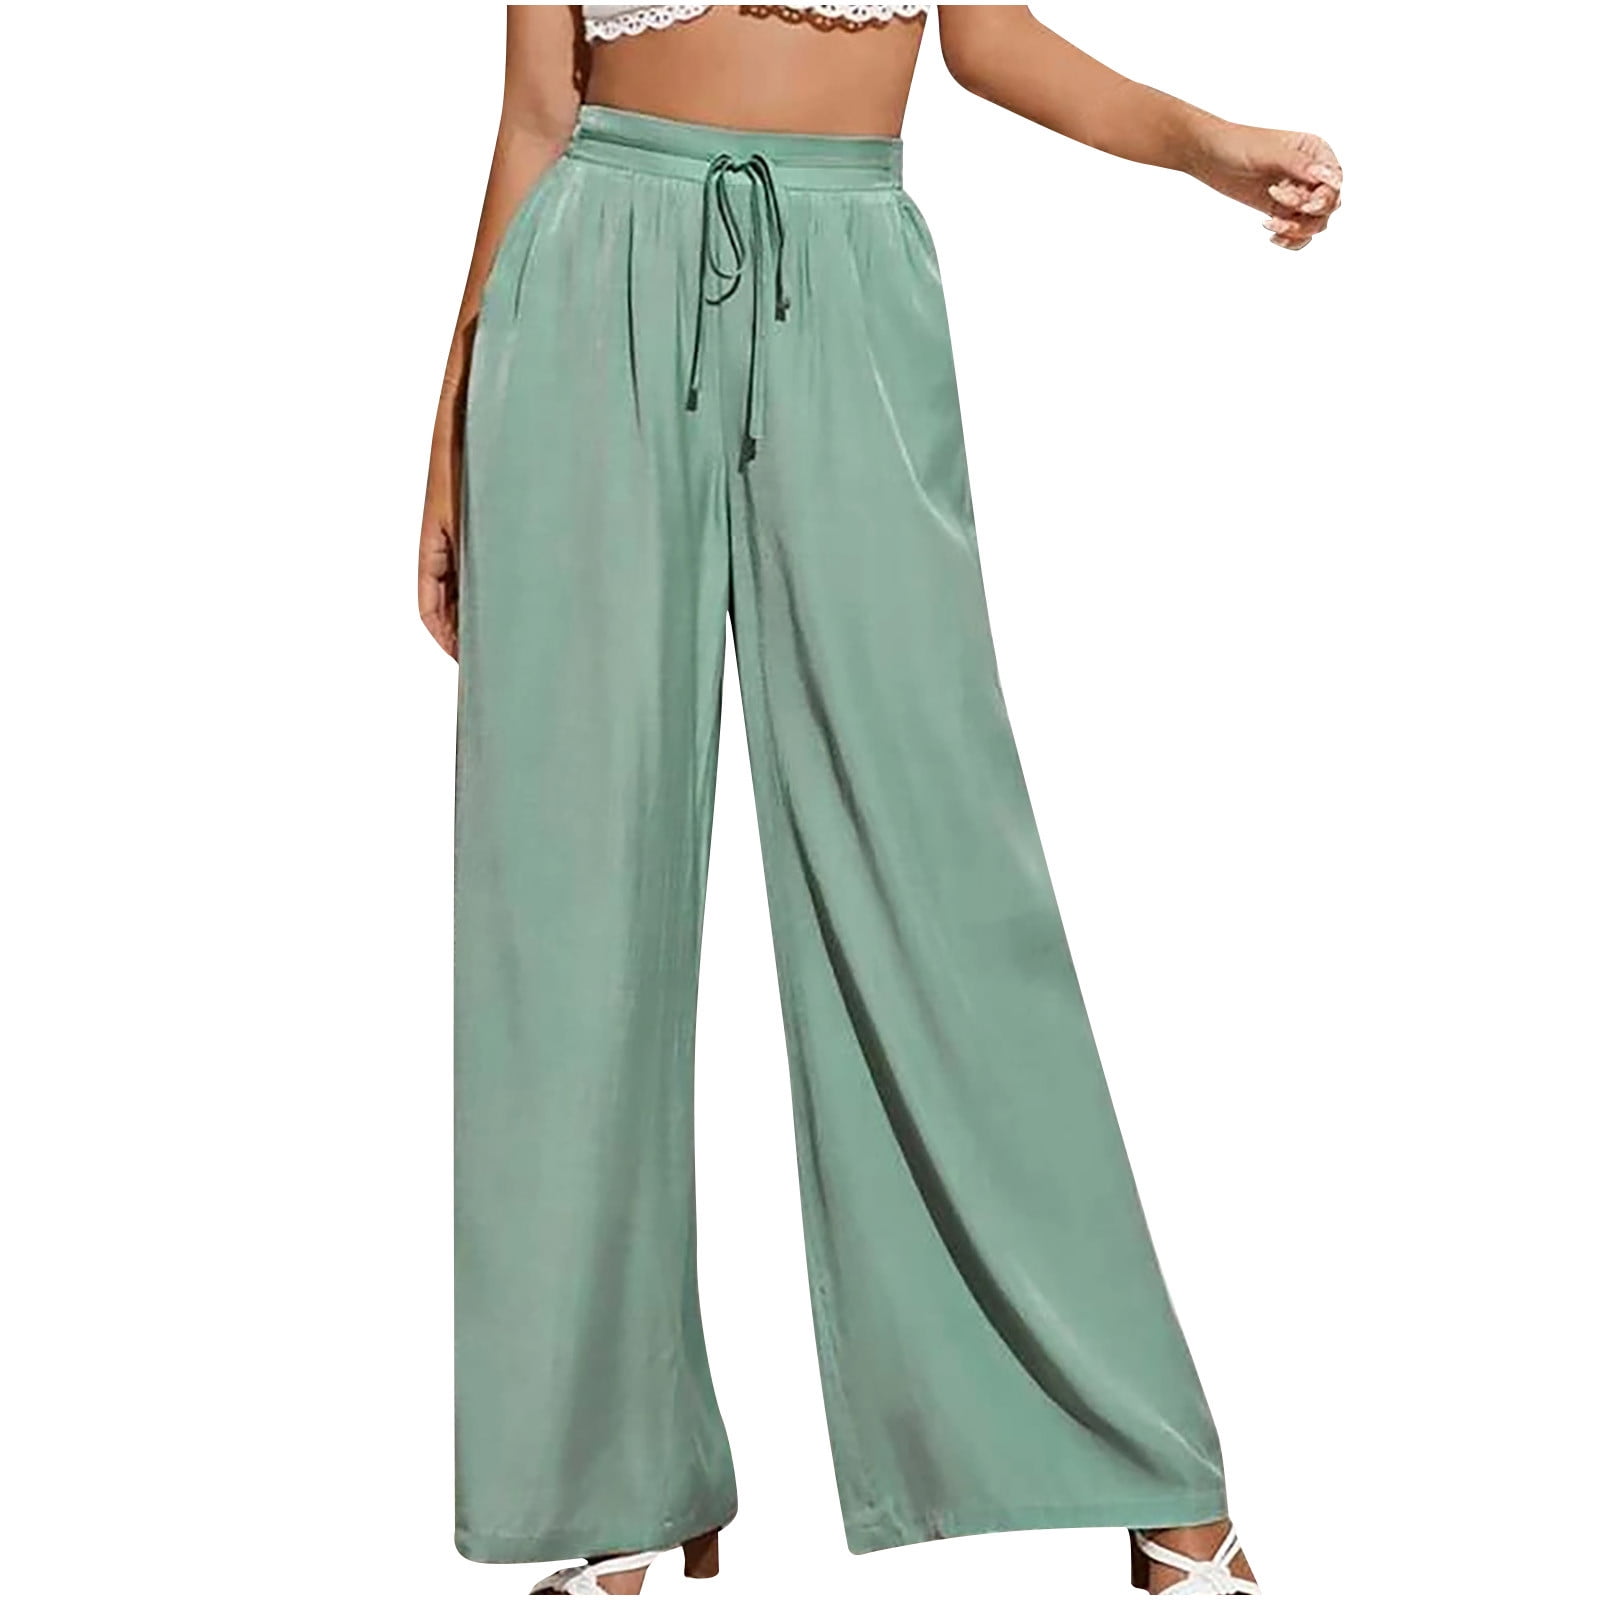 UHUYA Womens Casual Pants Trendy Versatile High Waist Tie Up All Match  Casual Corset Trousers Pants Coffee S US:4